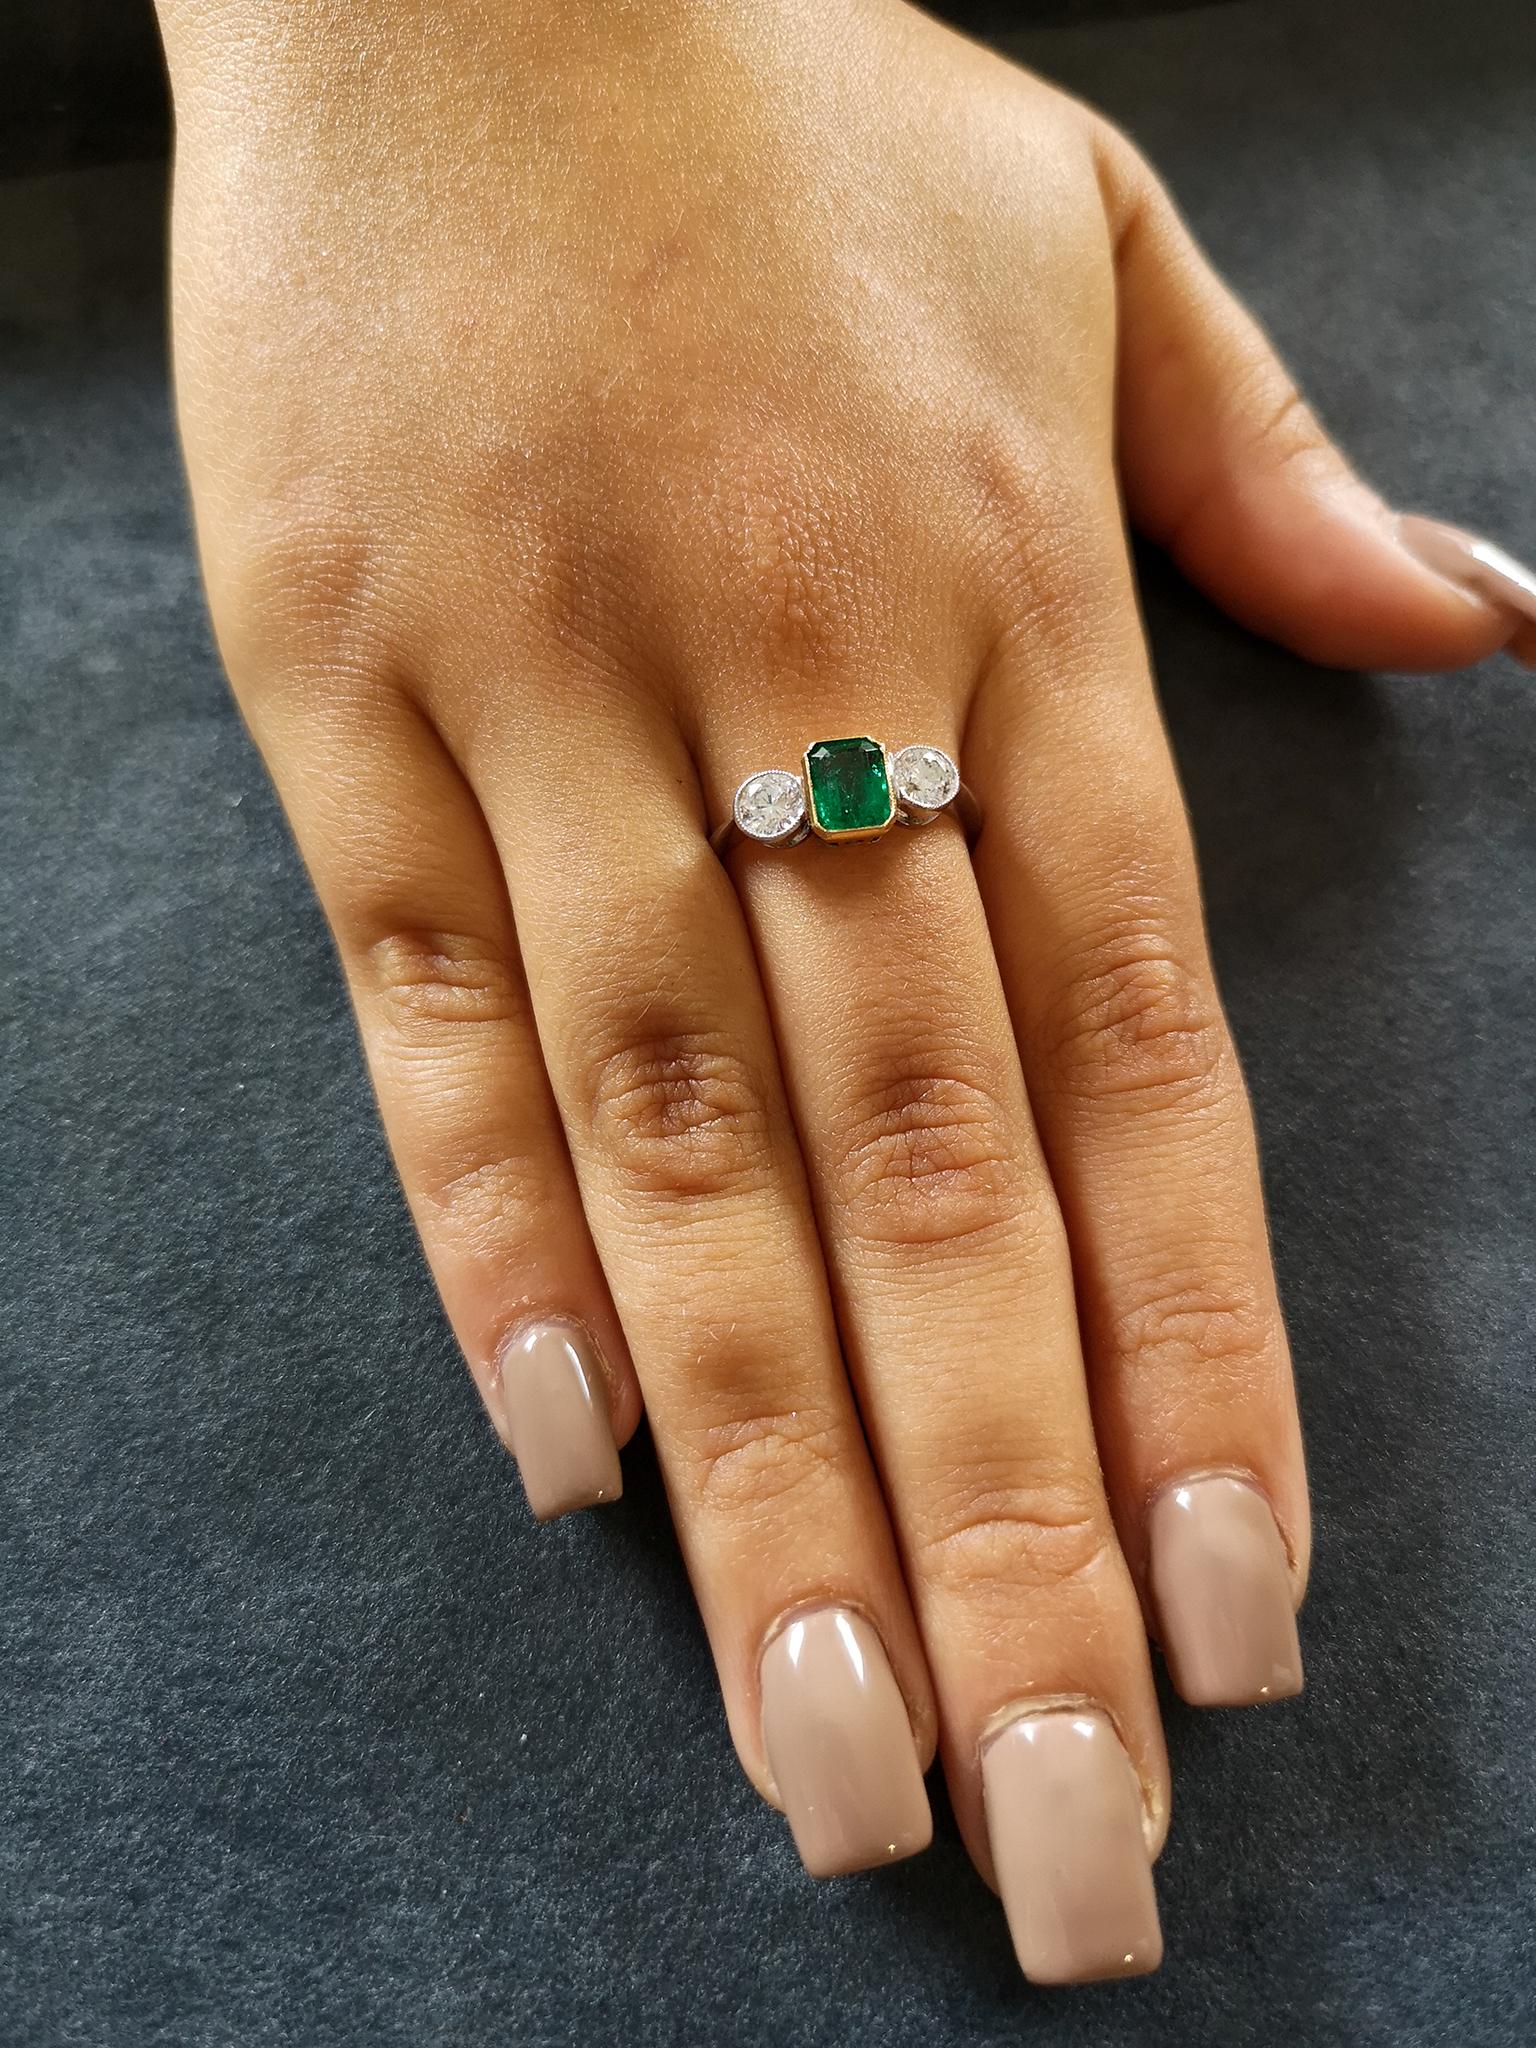 The central emerald-cut emerald of bottle green colour and approximately 1.25 carats mounted in an 18-carat yellow gold bezel setting, flanked on each side by a single brilliant-cut diamond, each approximately 0.40 of a carat, H colour and SI